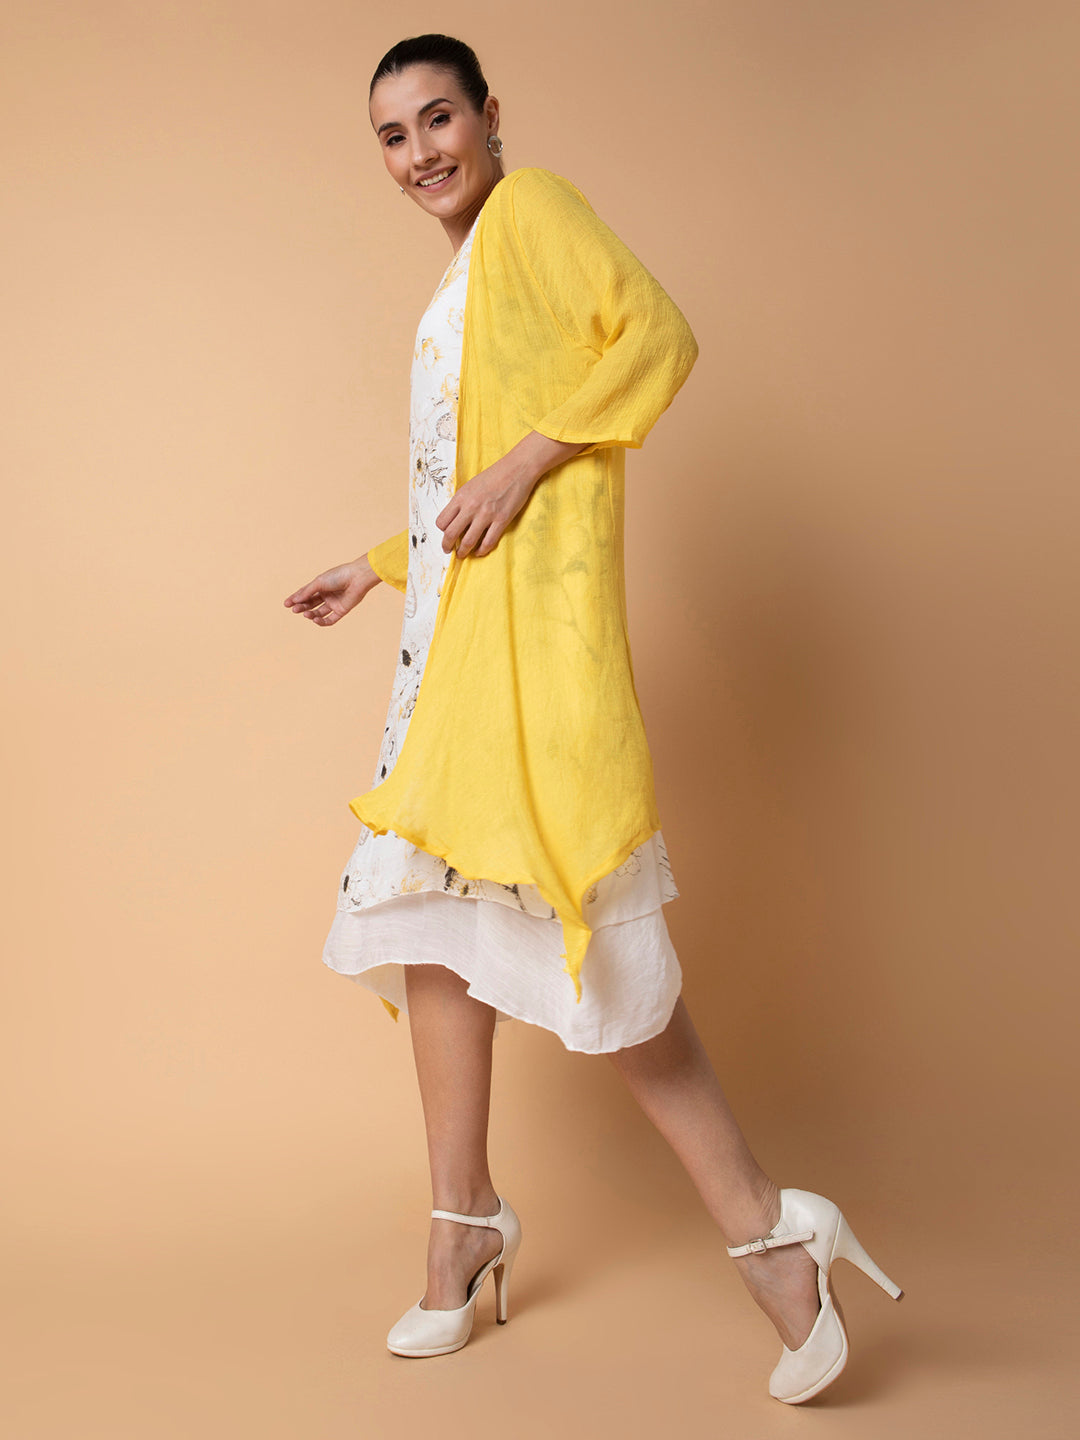 Women Floral Yellow Midi A-Line Dress with shrug